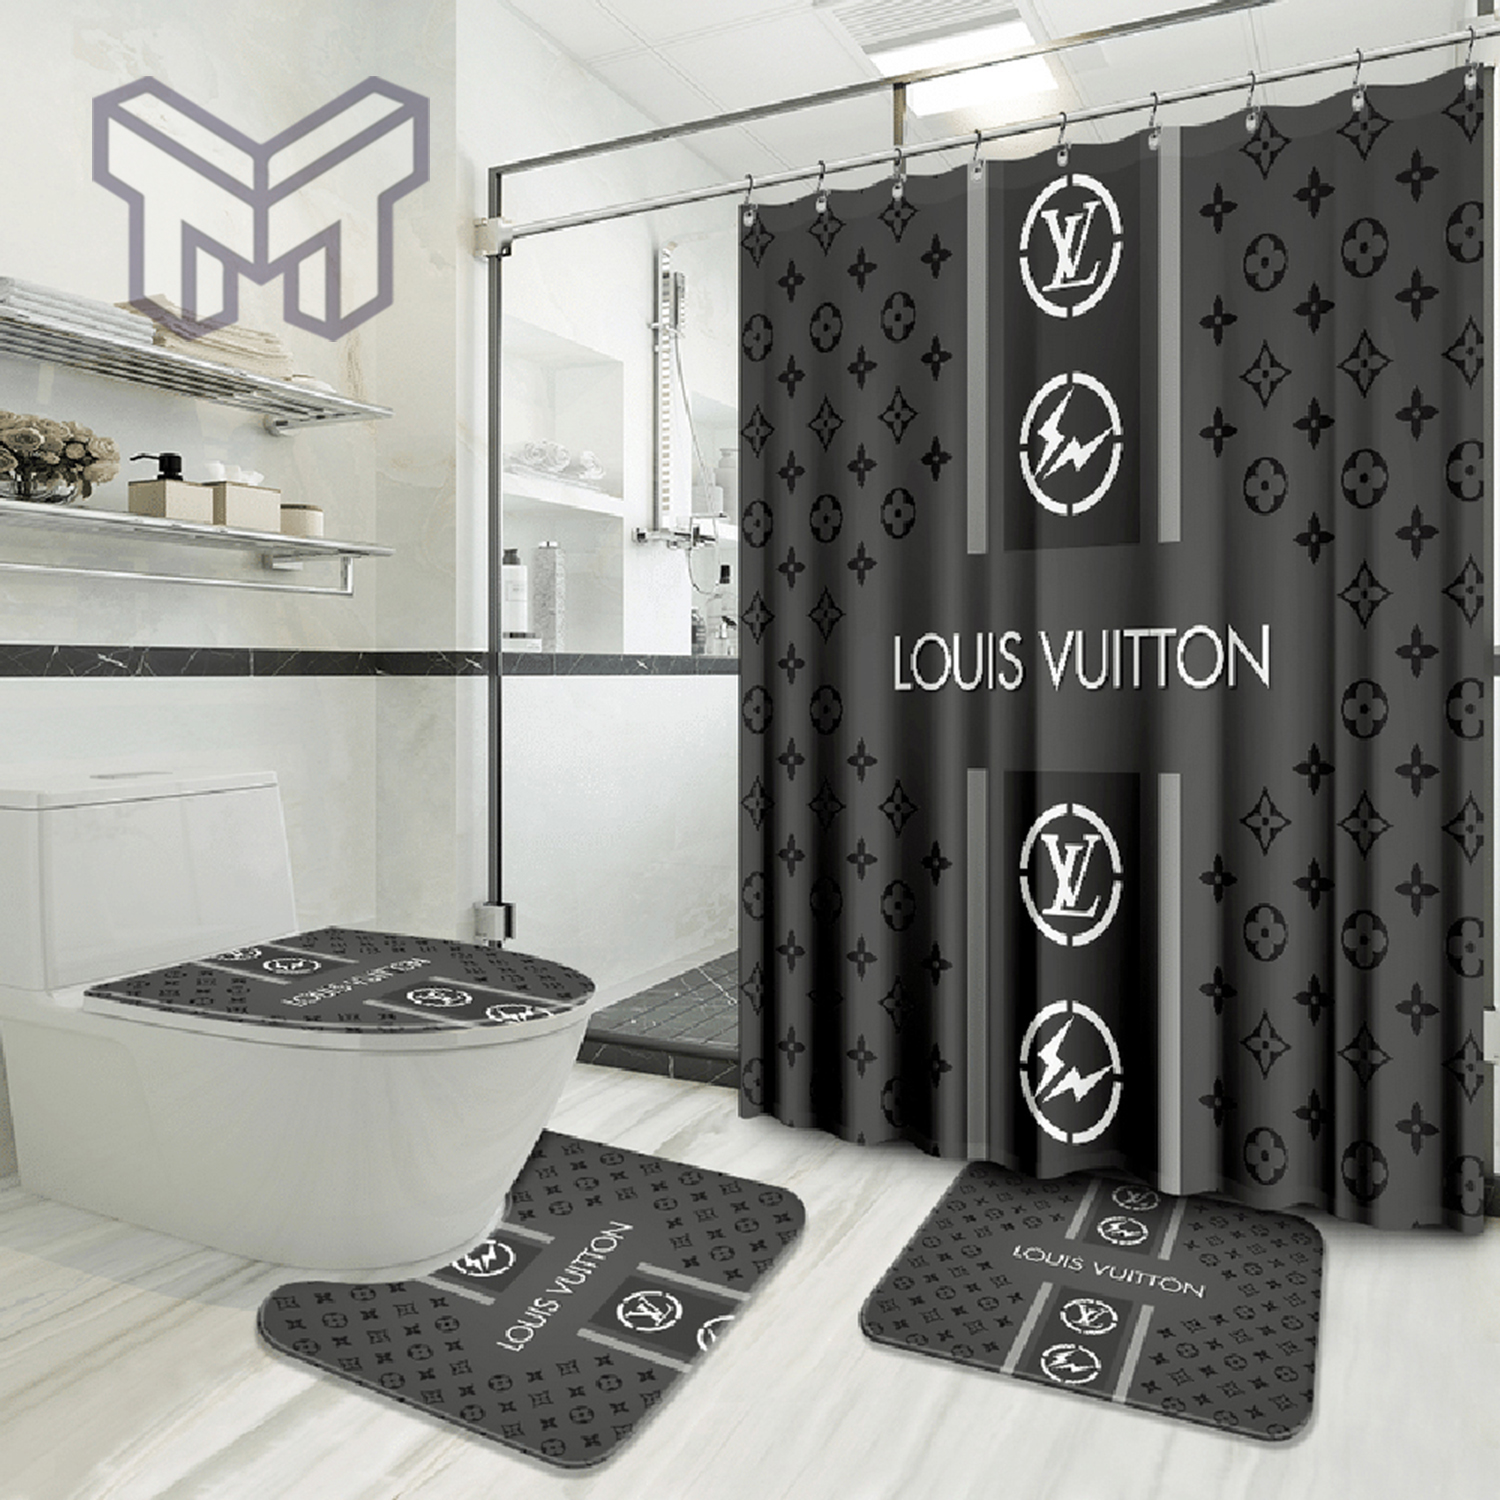 Louis Vuitton Bathroom Set Luxury Shower 2 - Shower Curtain And Rug Toilet  Seat Lid Covers Bathroom Set - Infinite Creativity. Spend Less. Smile More